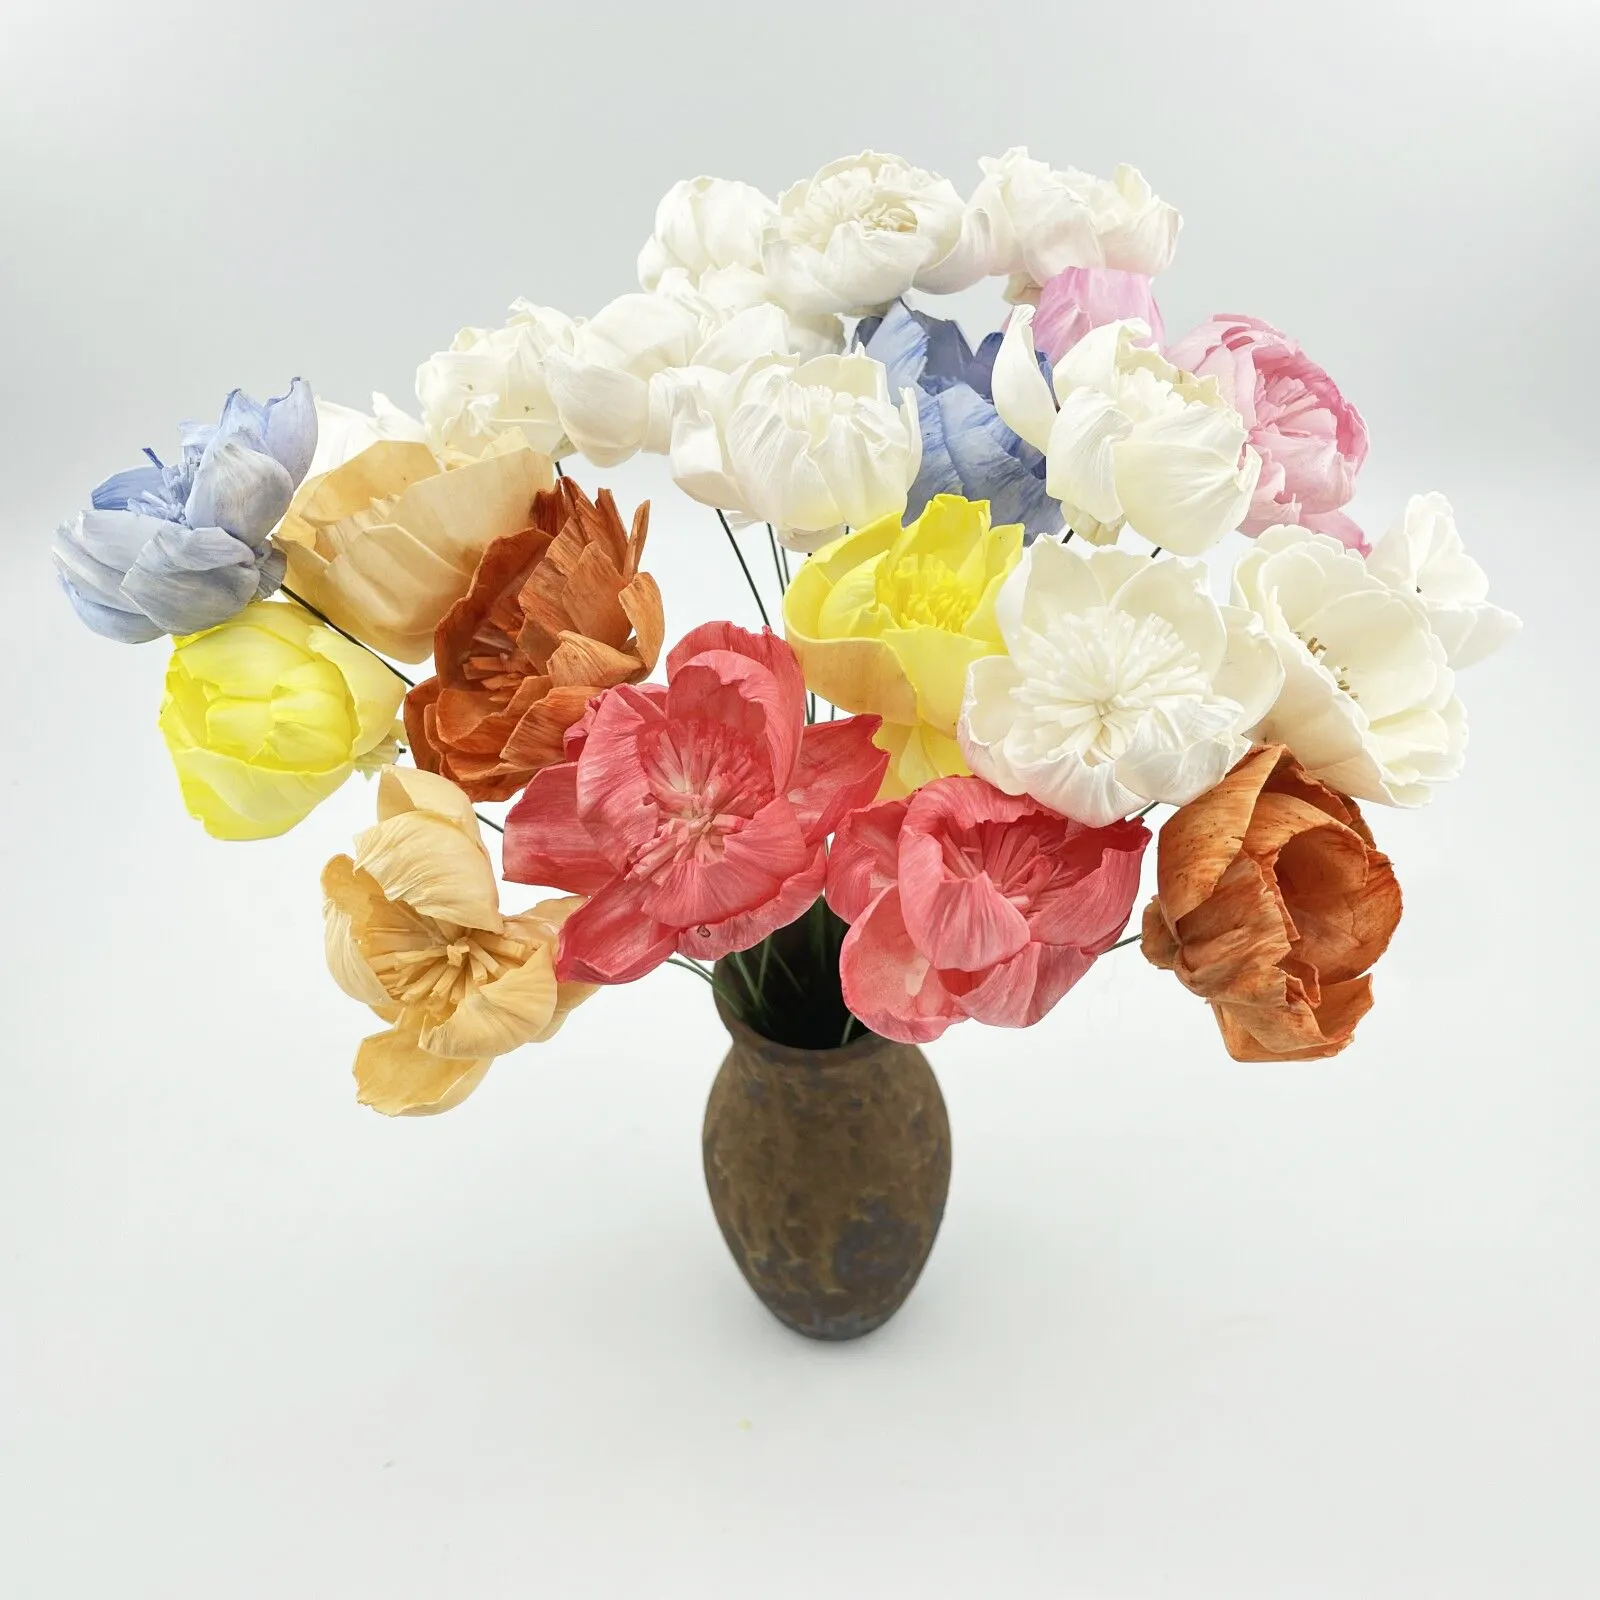 Yunnan Wholesale TAOXI Type 1 Colorful Artificial Handmade Flowers Dried Sola Flower For Home decoration